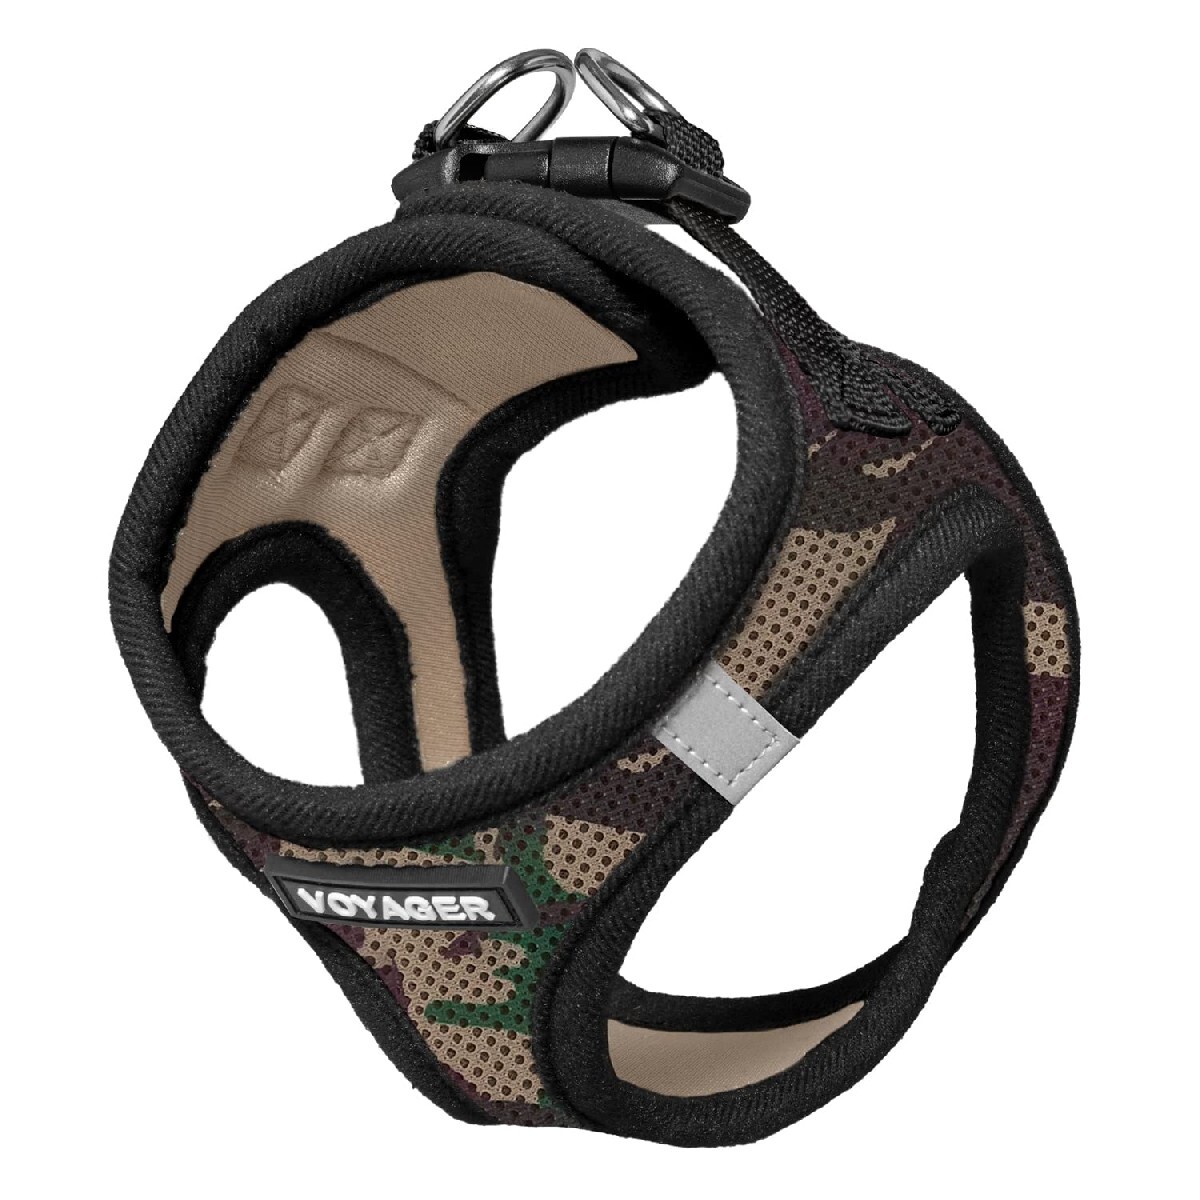 Voyager walk-in air all-weather mesh strap